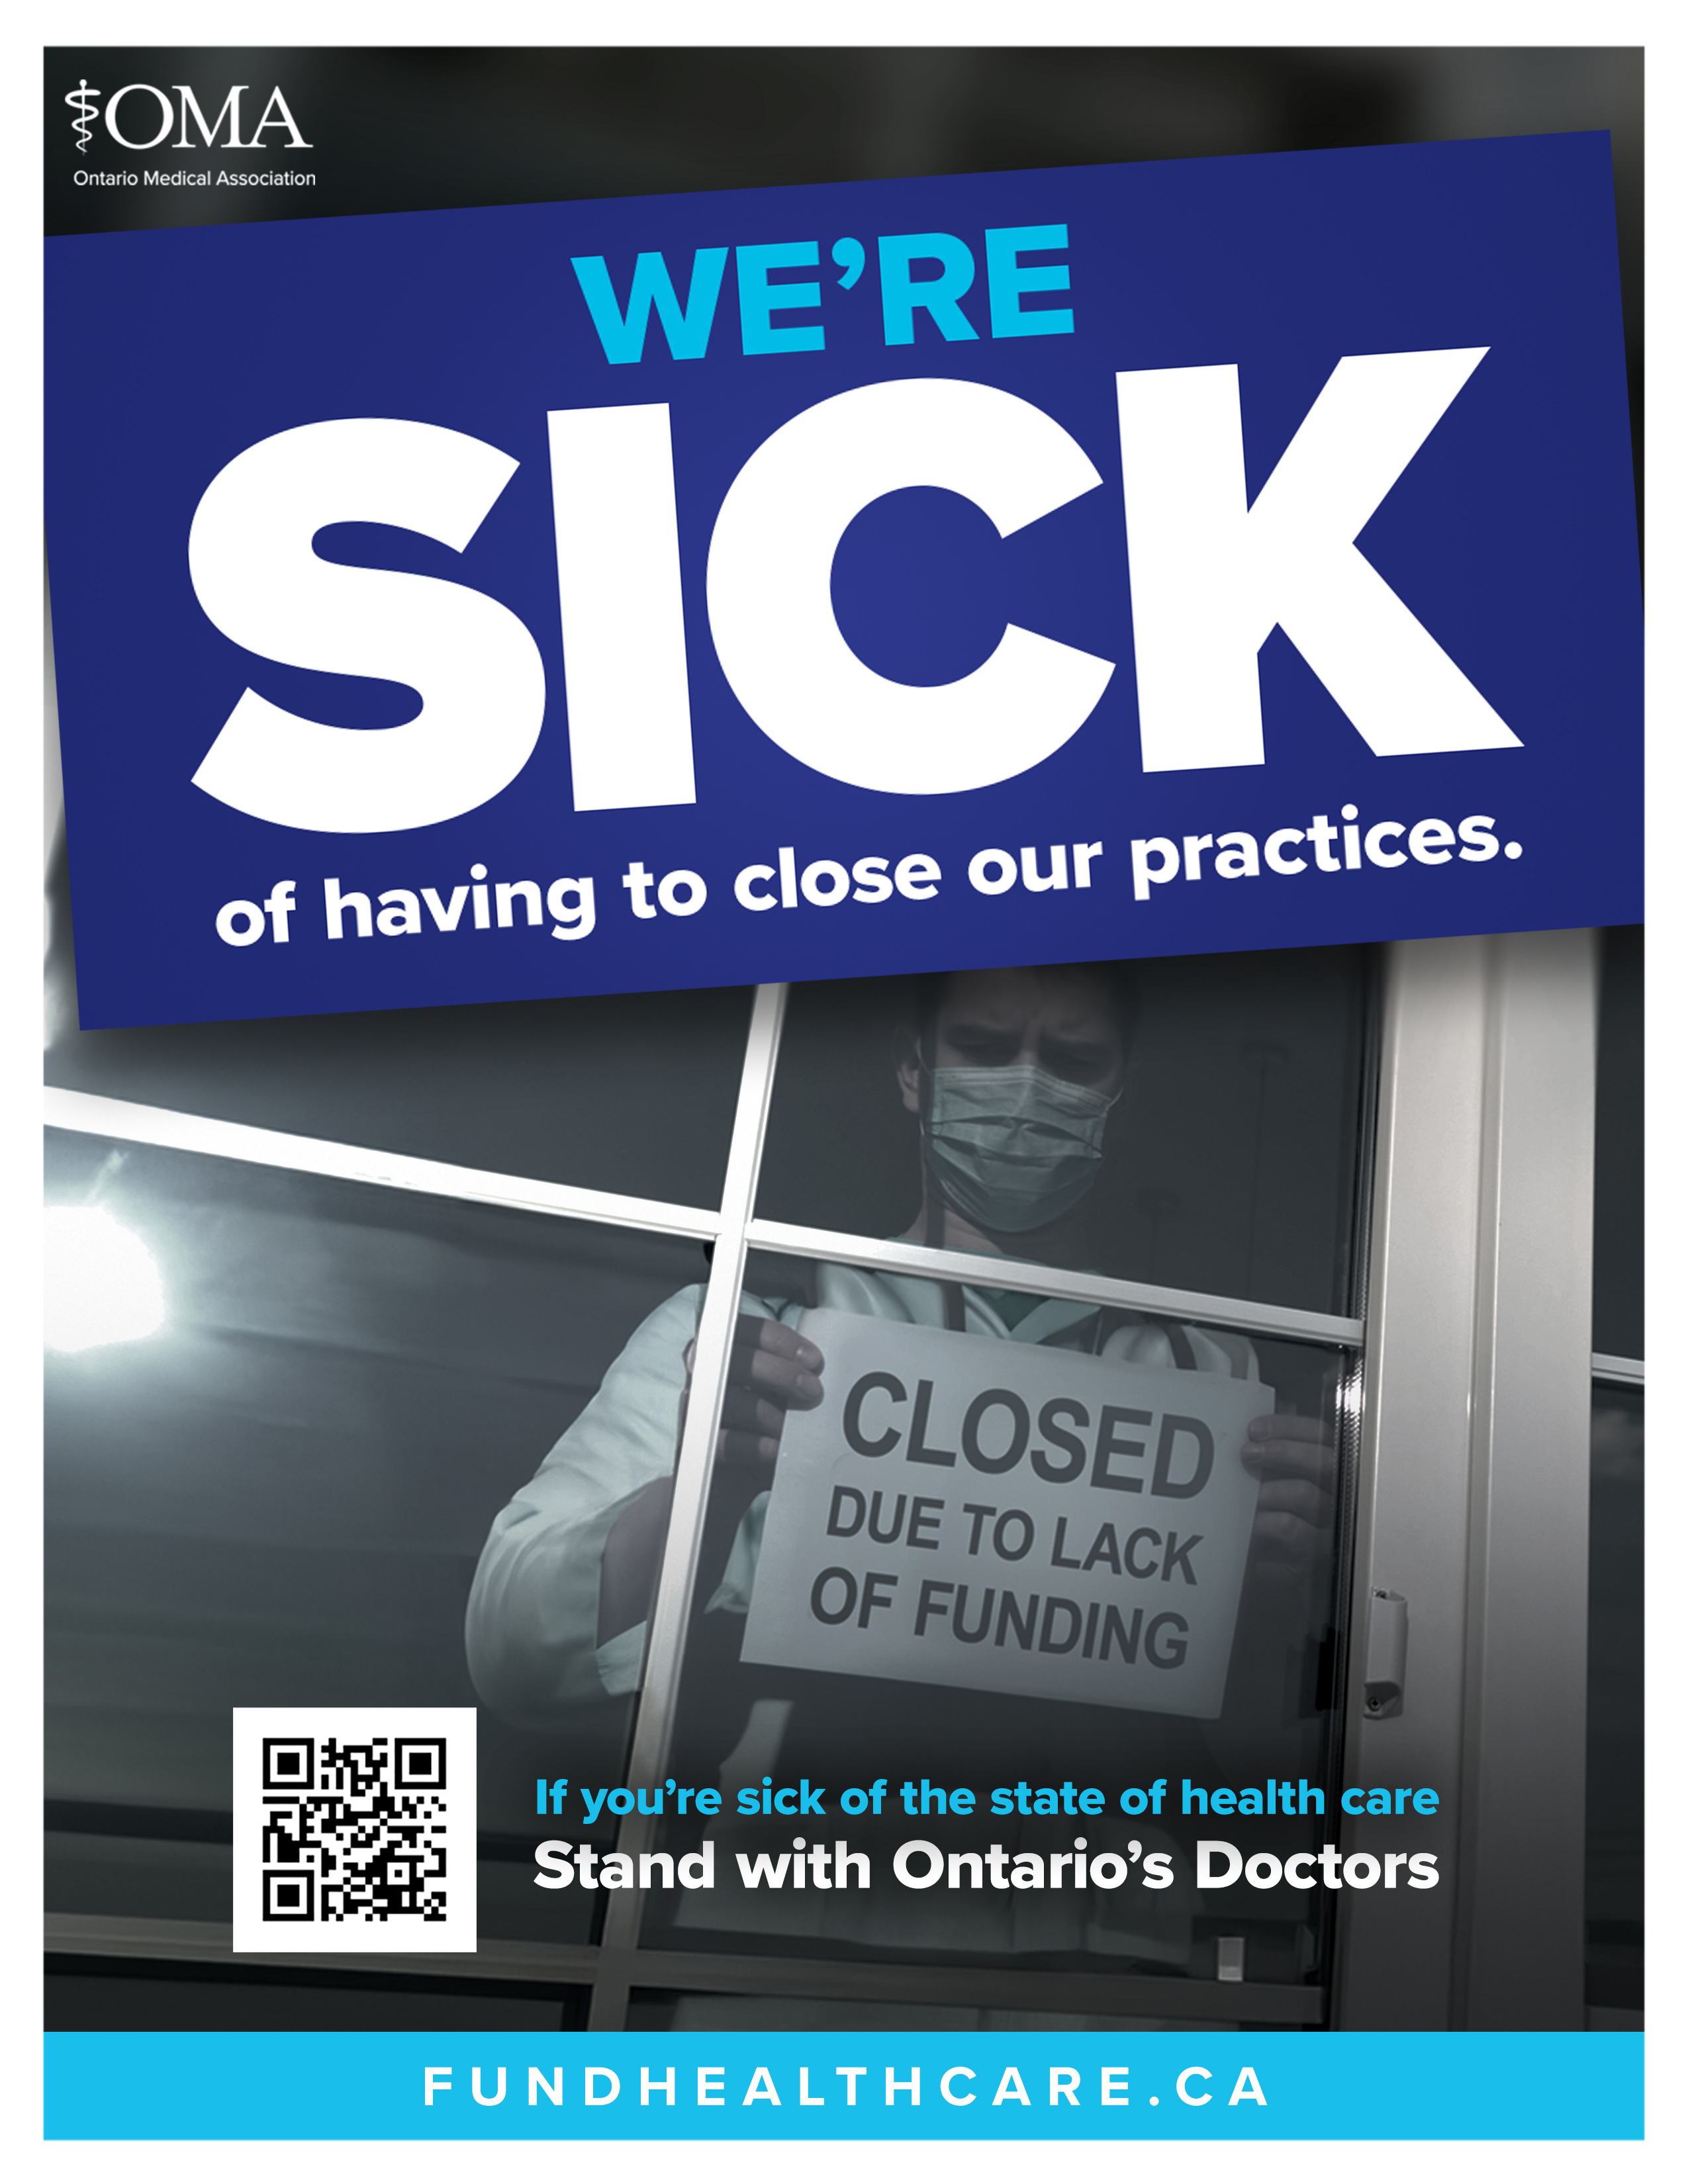 We're sick of having to close our practices poster